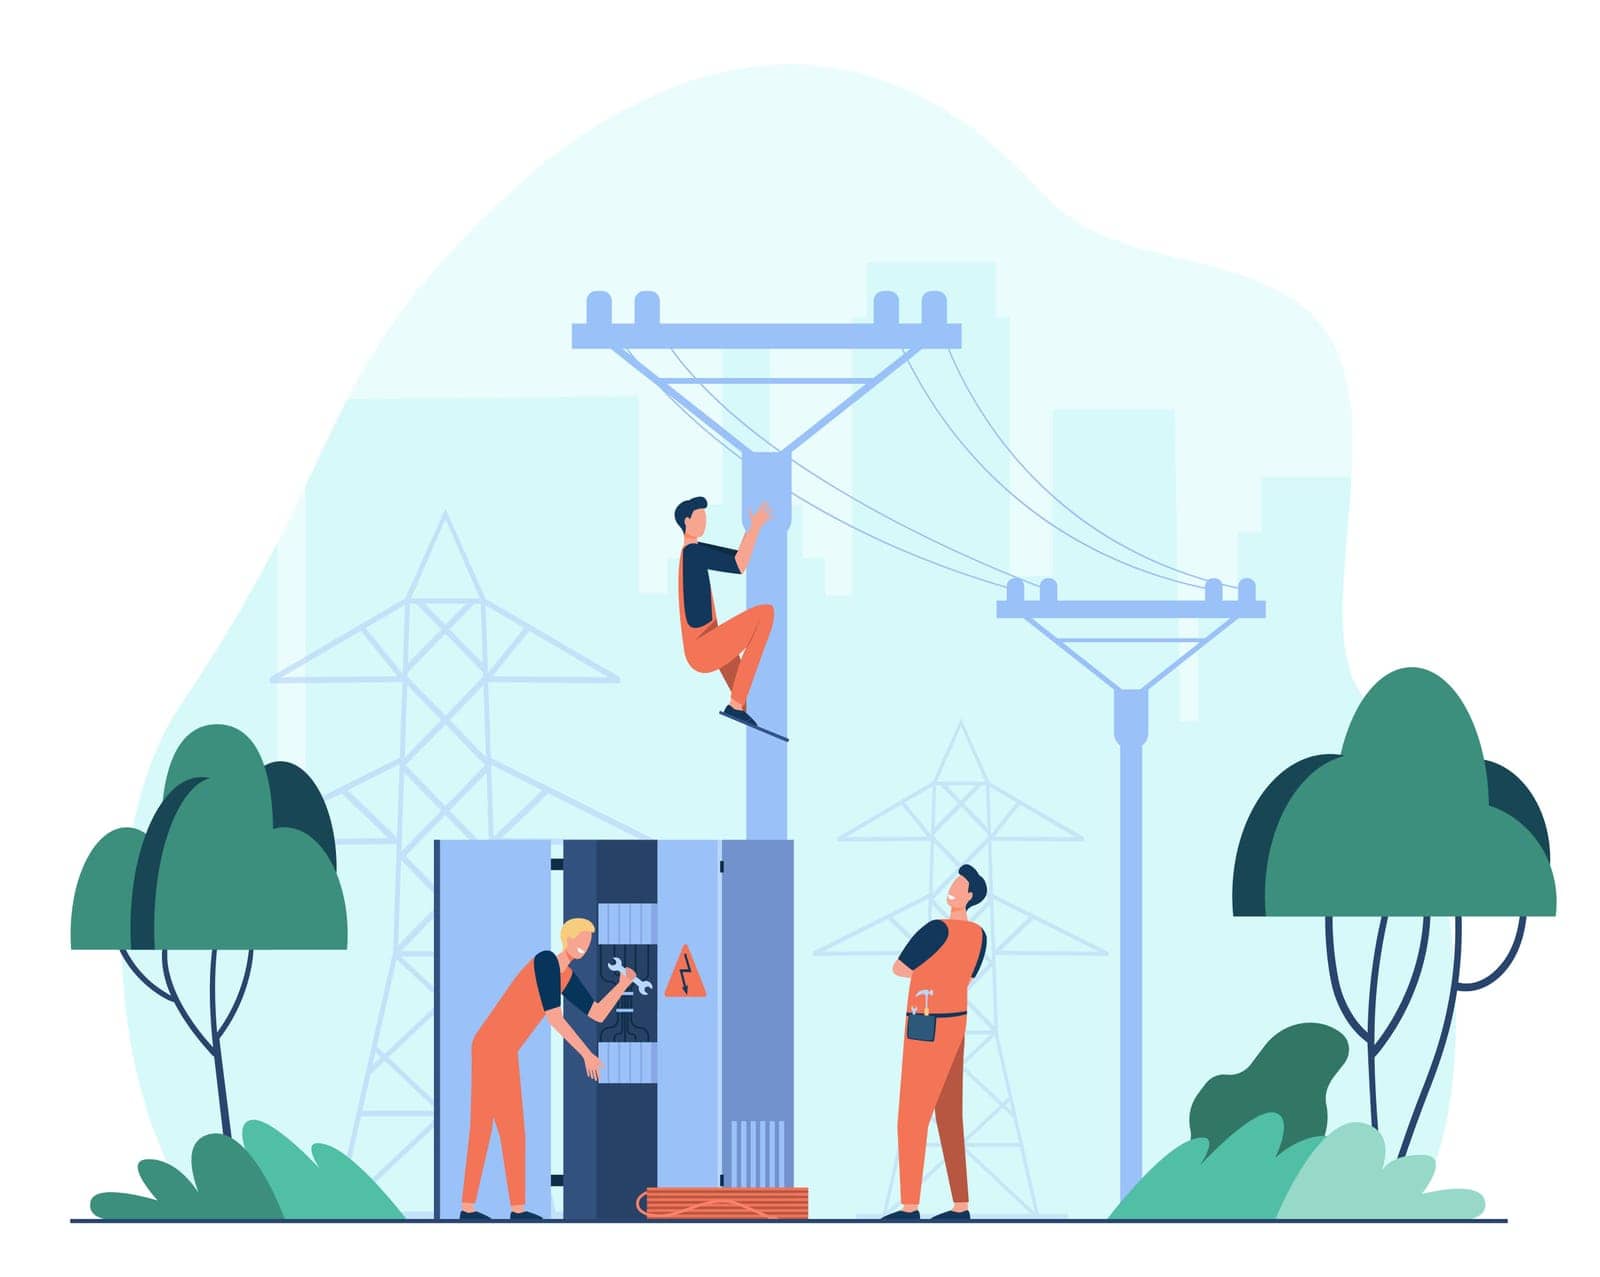 Technicians repairing generator transformer flat vector illustration. Cartoon electric workers making power distribution line. Electricity energy service and maintenance concept